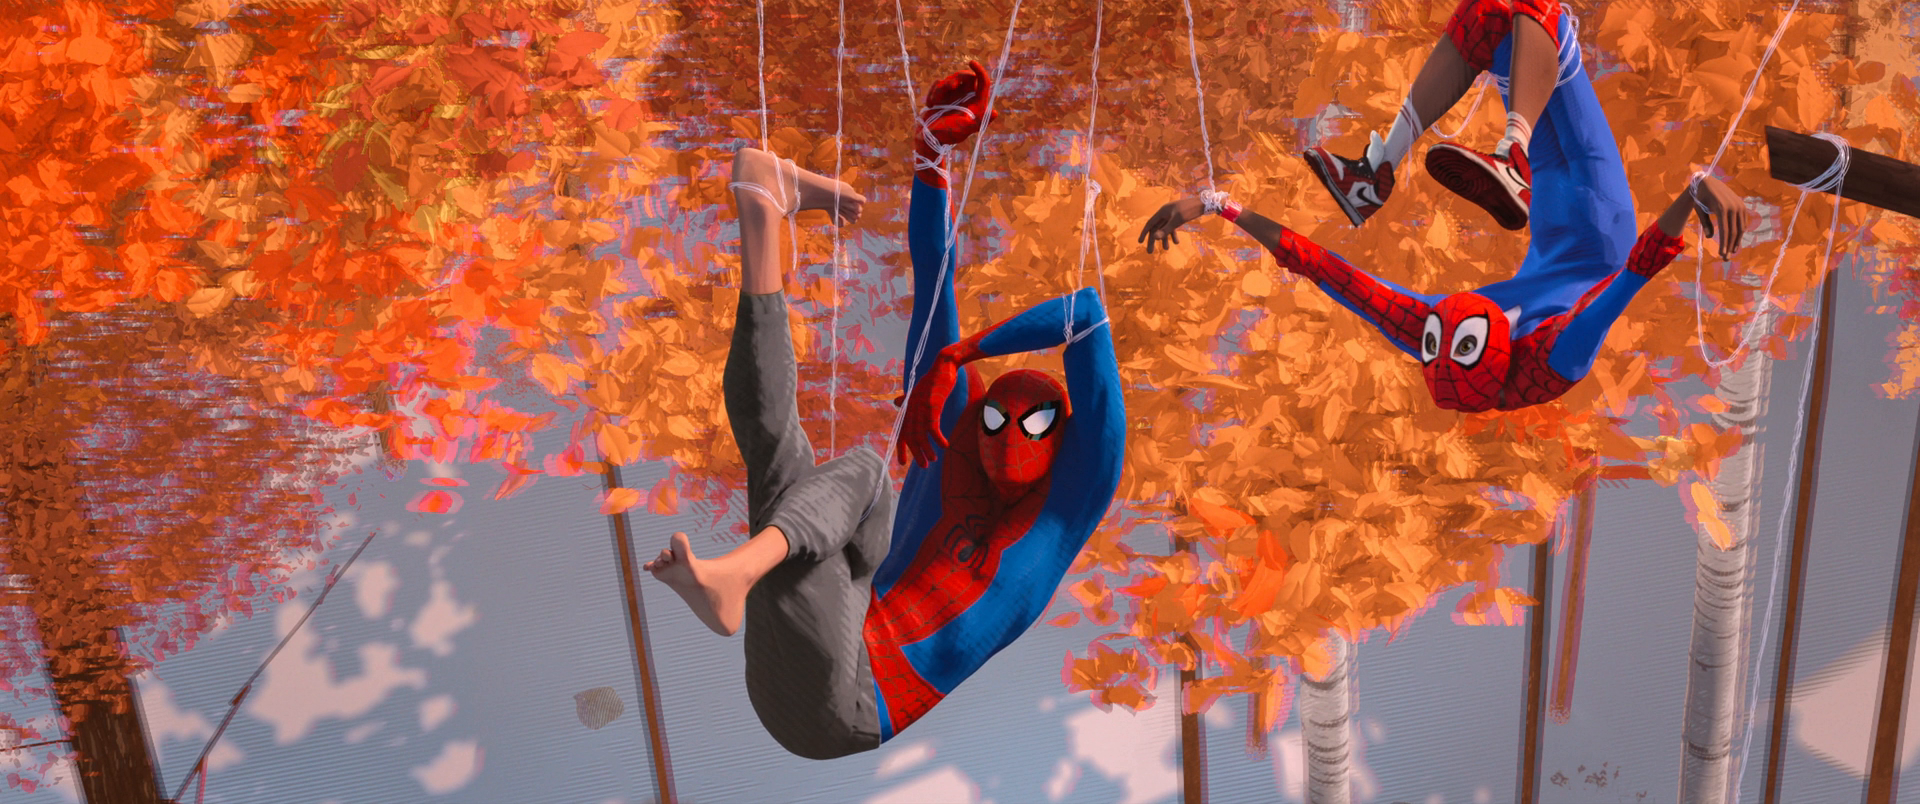 download across the spider verse for free